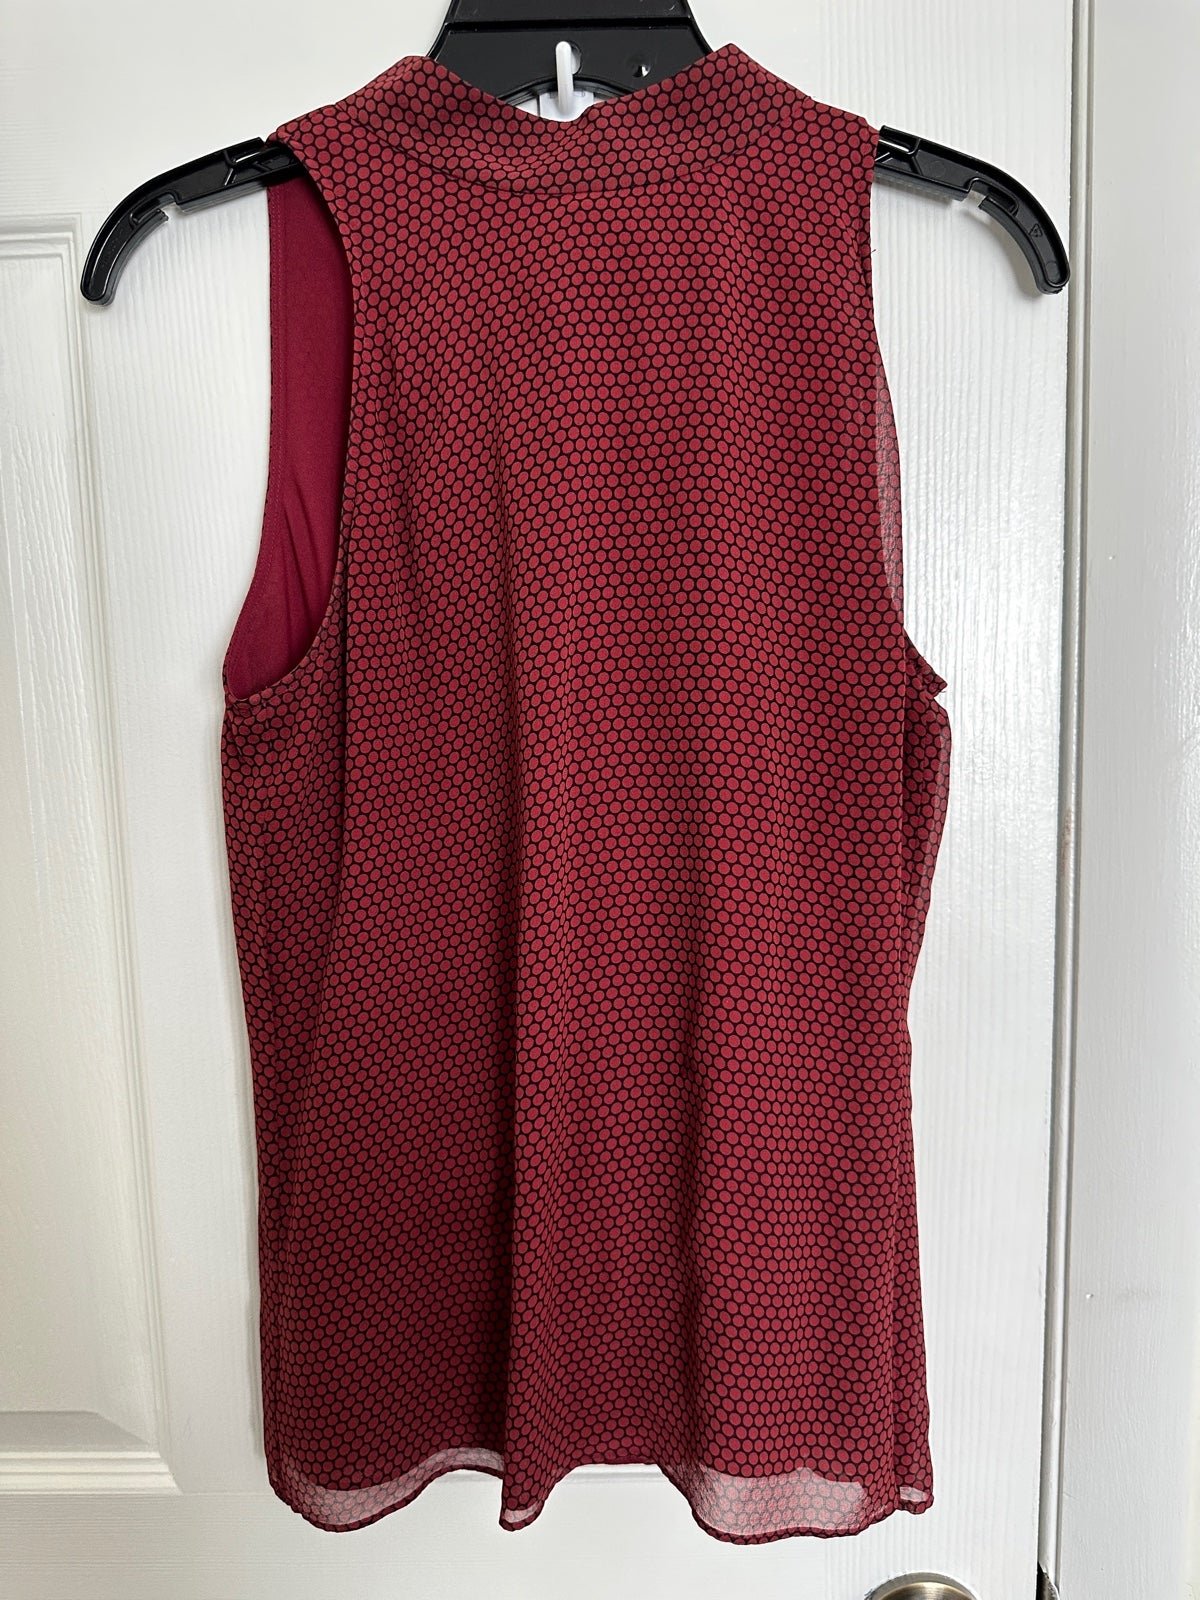 Simple Theory silk red black halter top - size Small P9MivSnKT Fashion